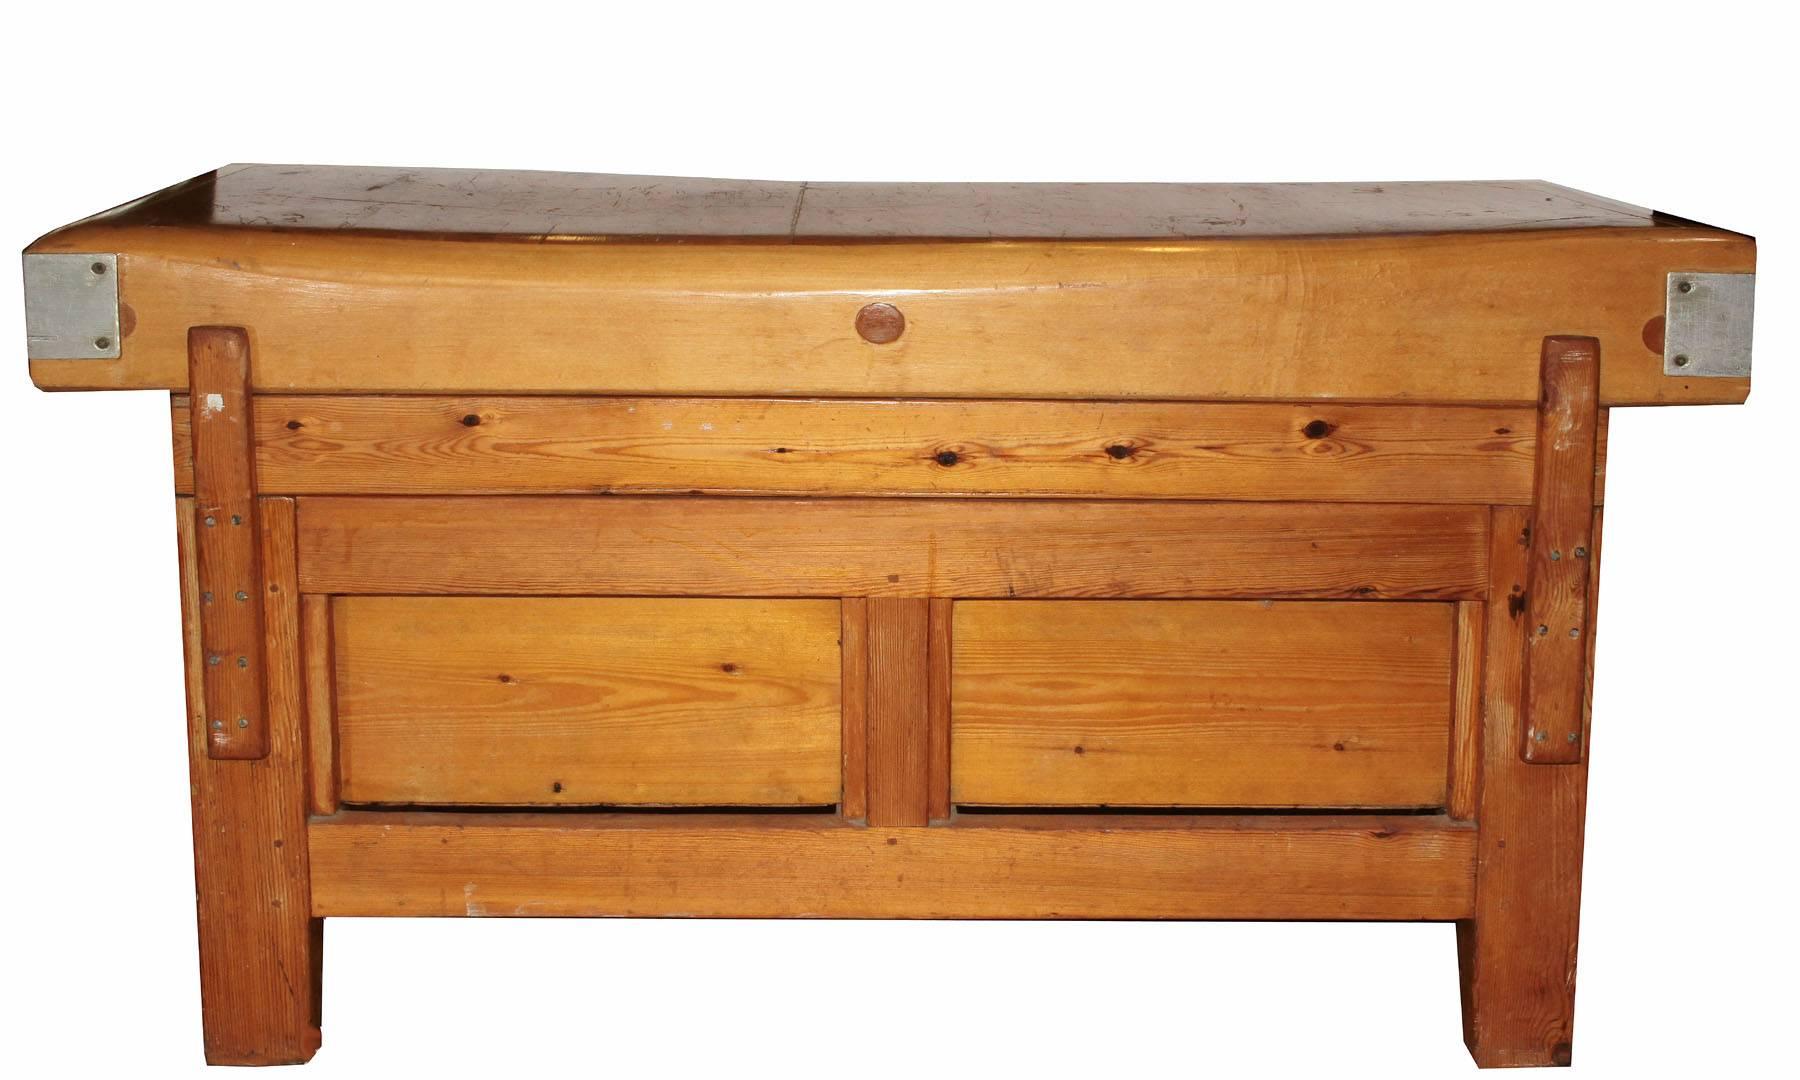 This is a solid maple top butchers block. The top has been finished but the details show through. Two drawers make it extra functional as well as a nice visual balance. The edges are accented and reinforced with metal trim.